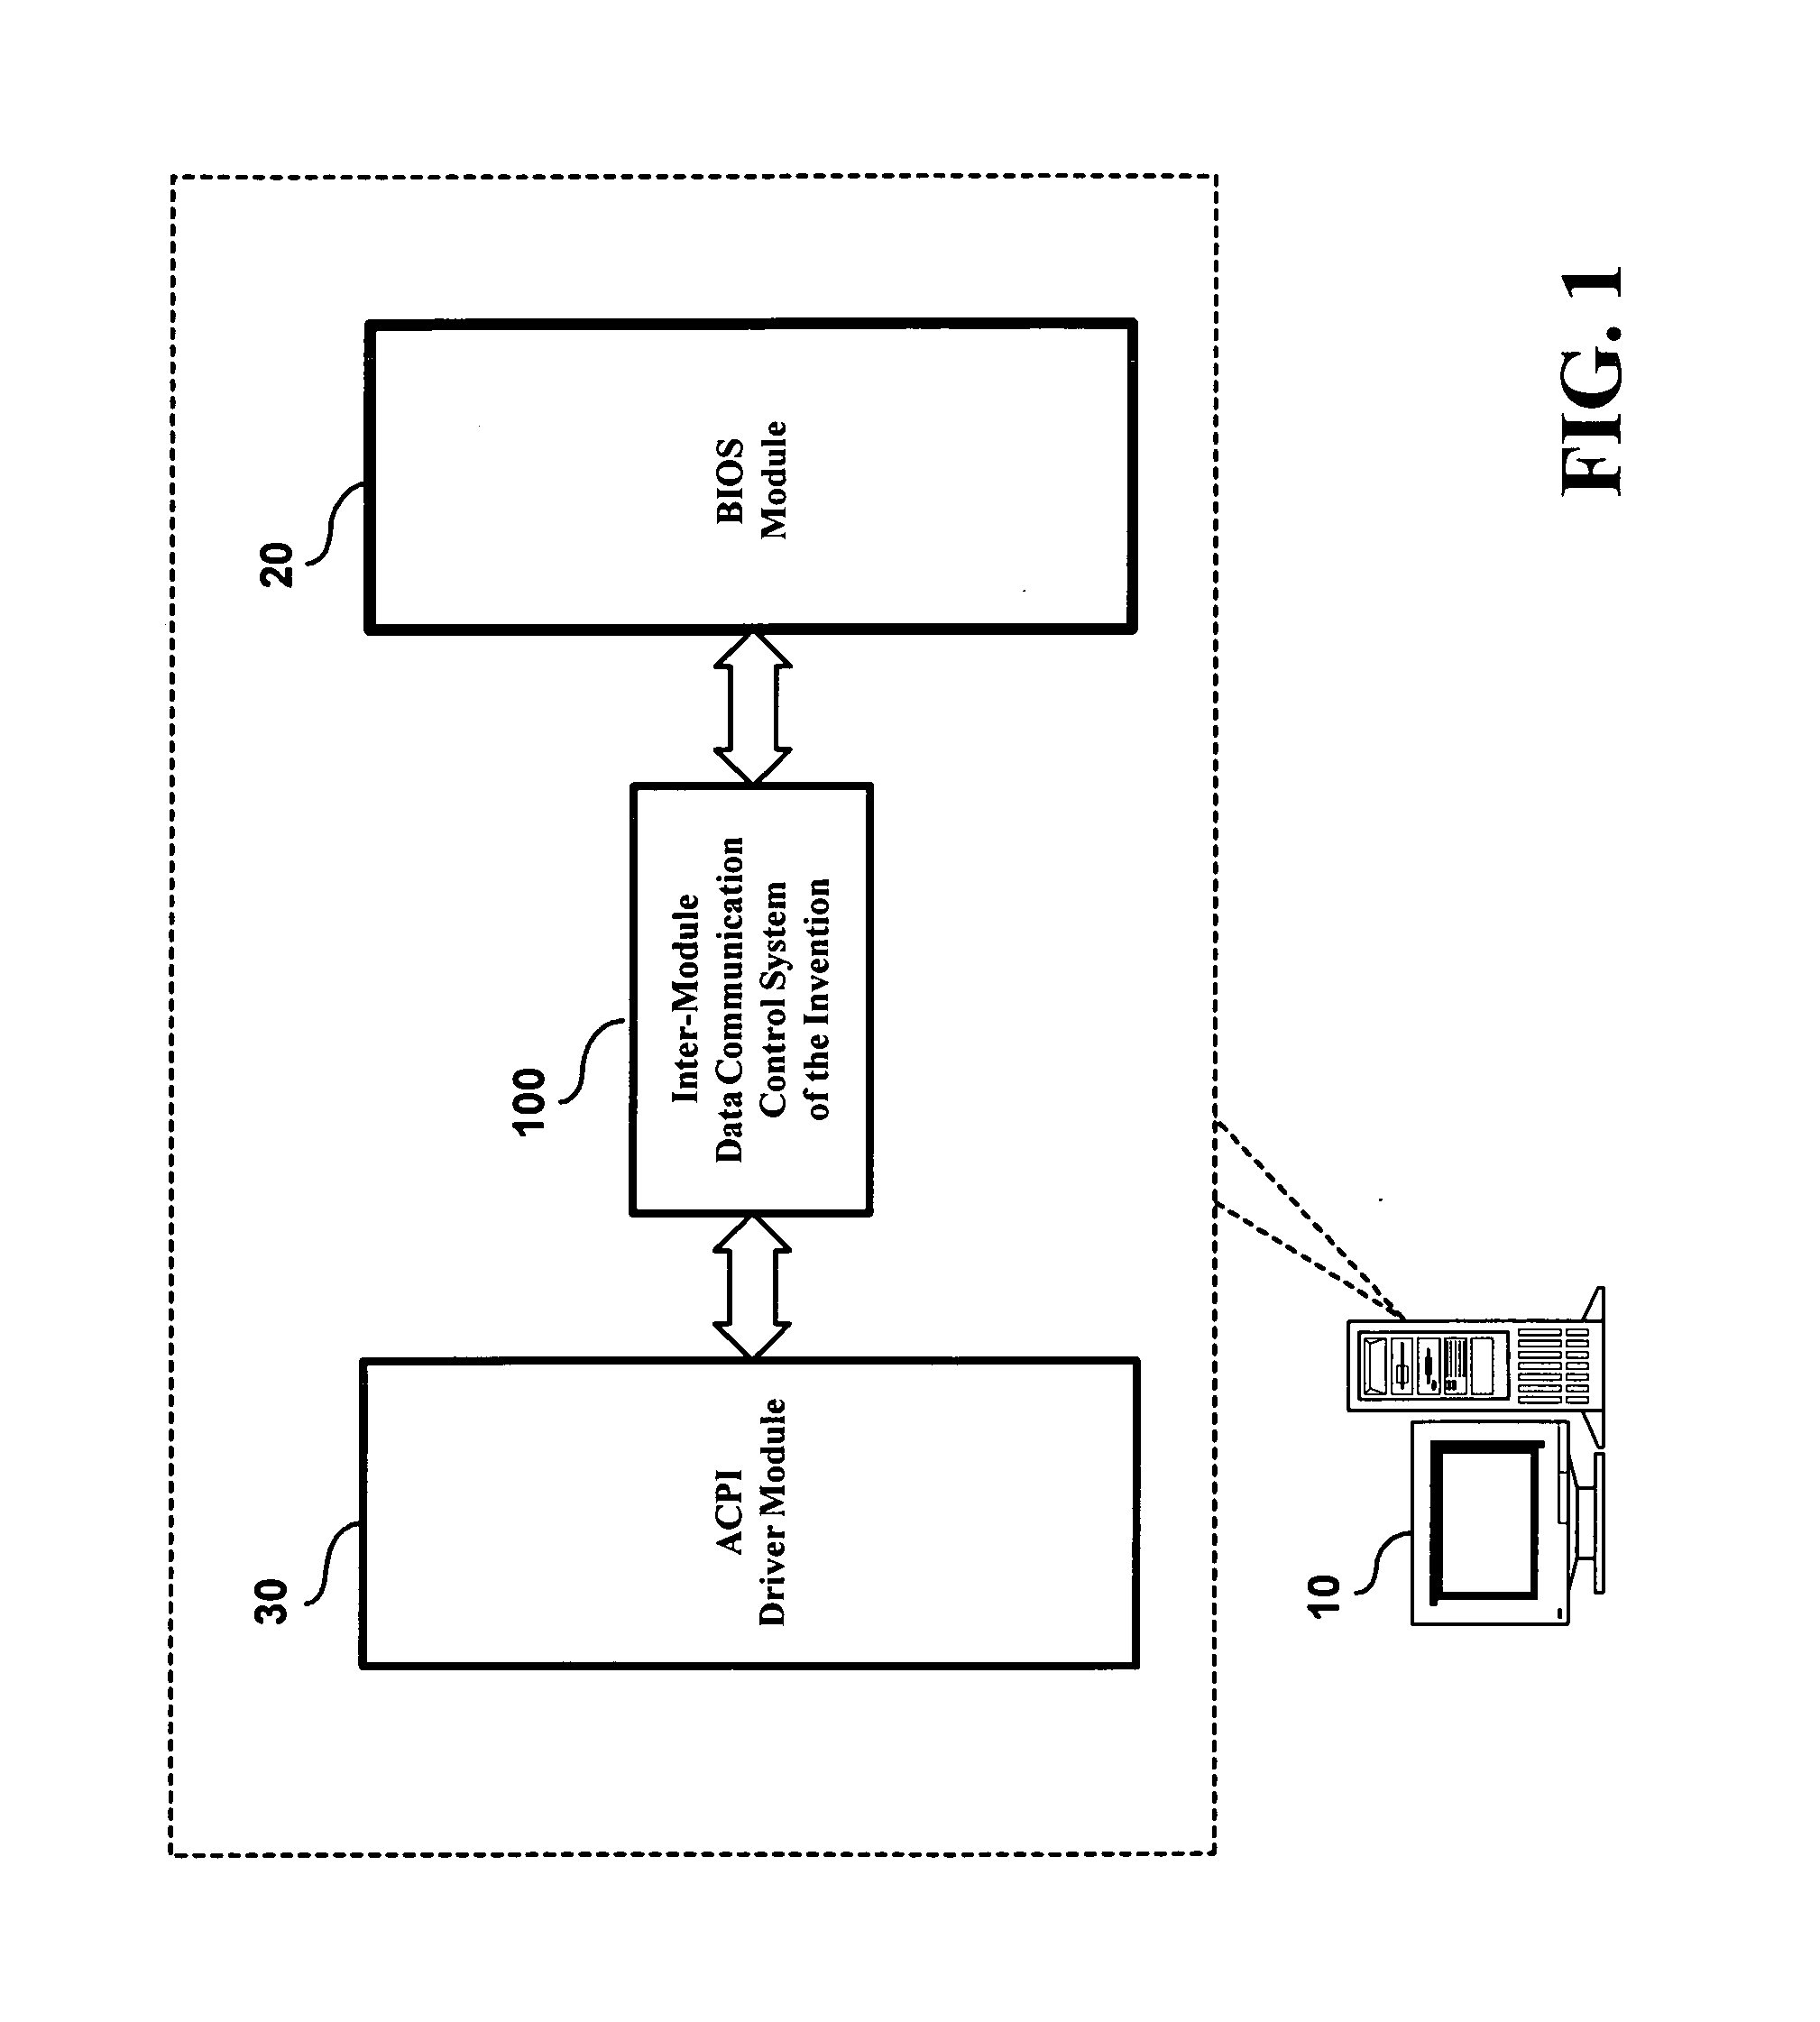 Inter-module data communication control method and system for ACPI and BIOS